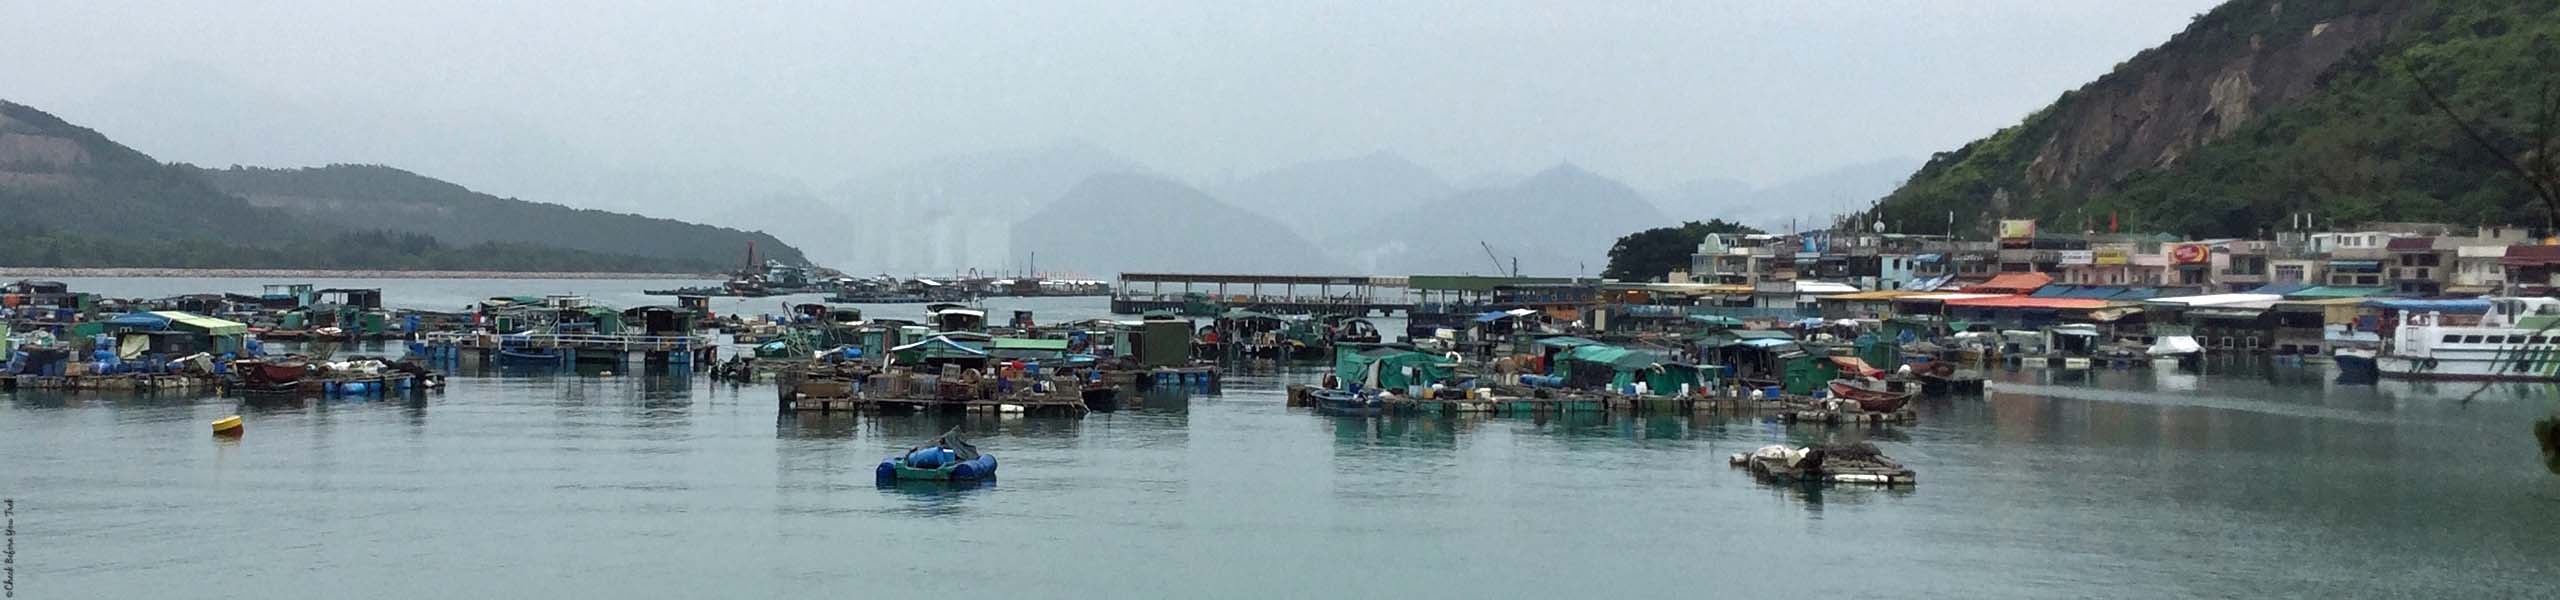 Featured Photo for article on Lamma Island - Hong Kong, China